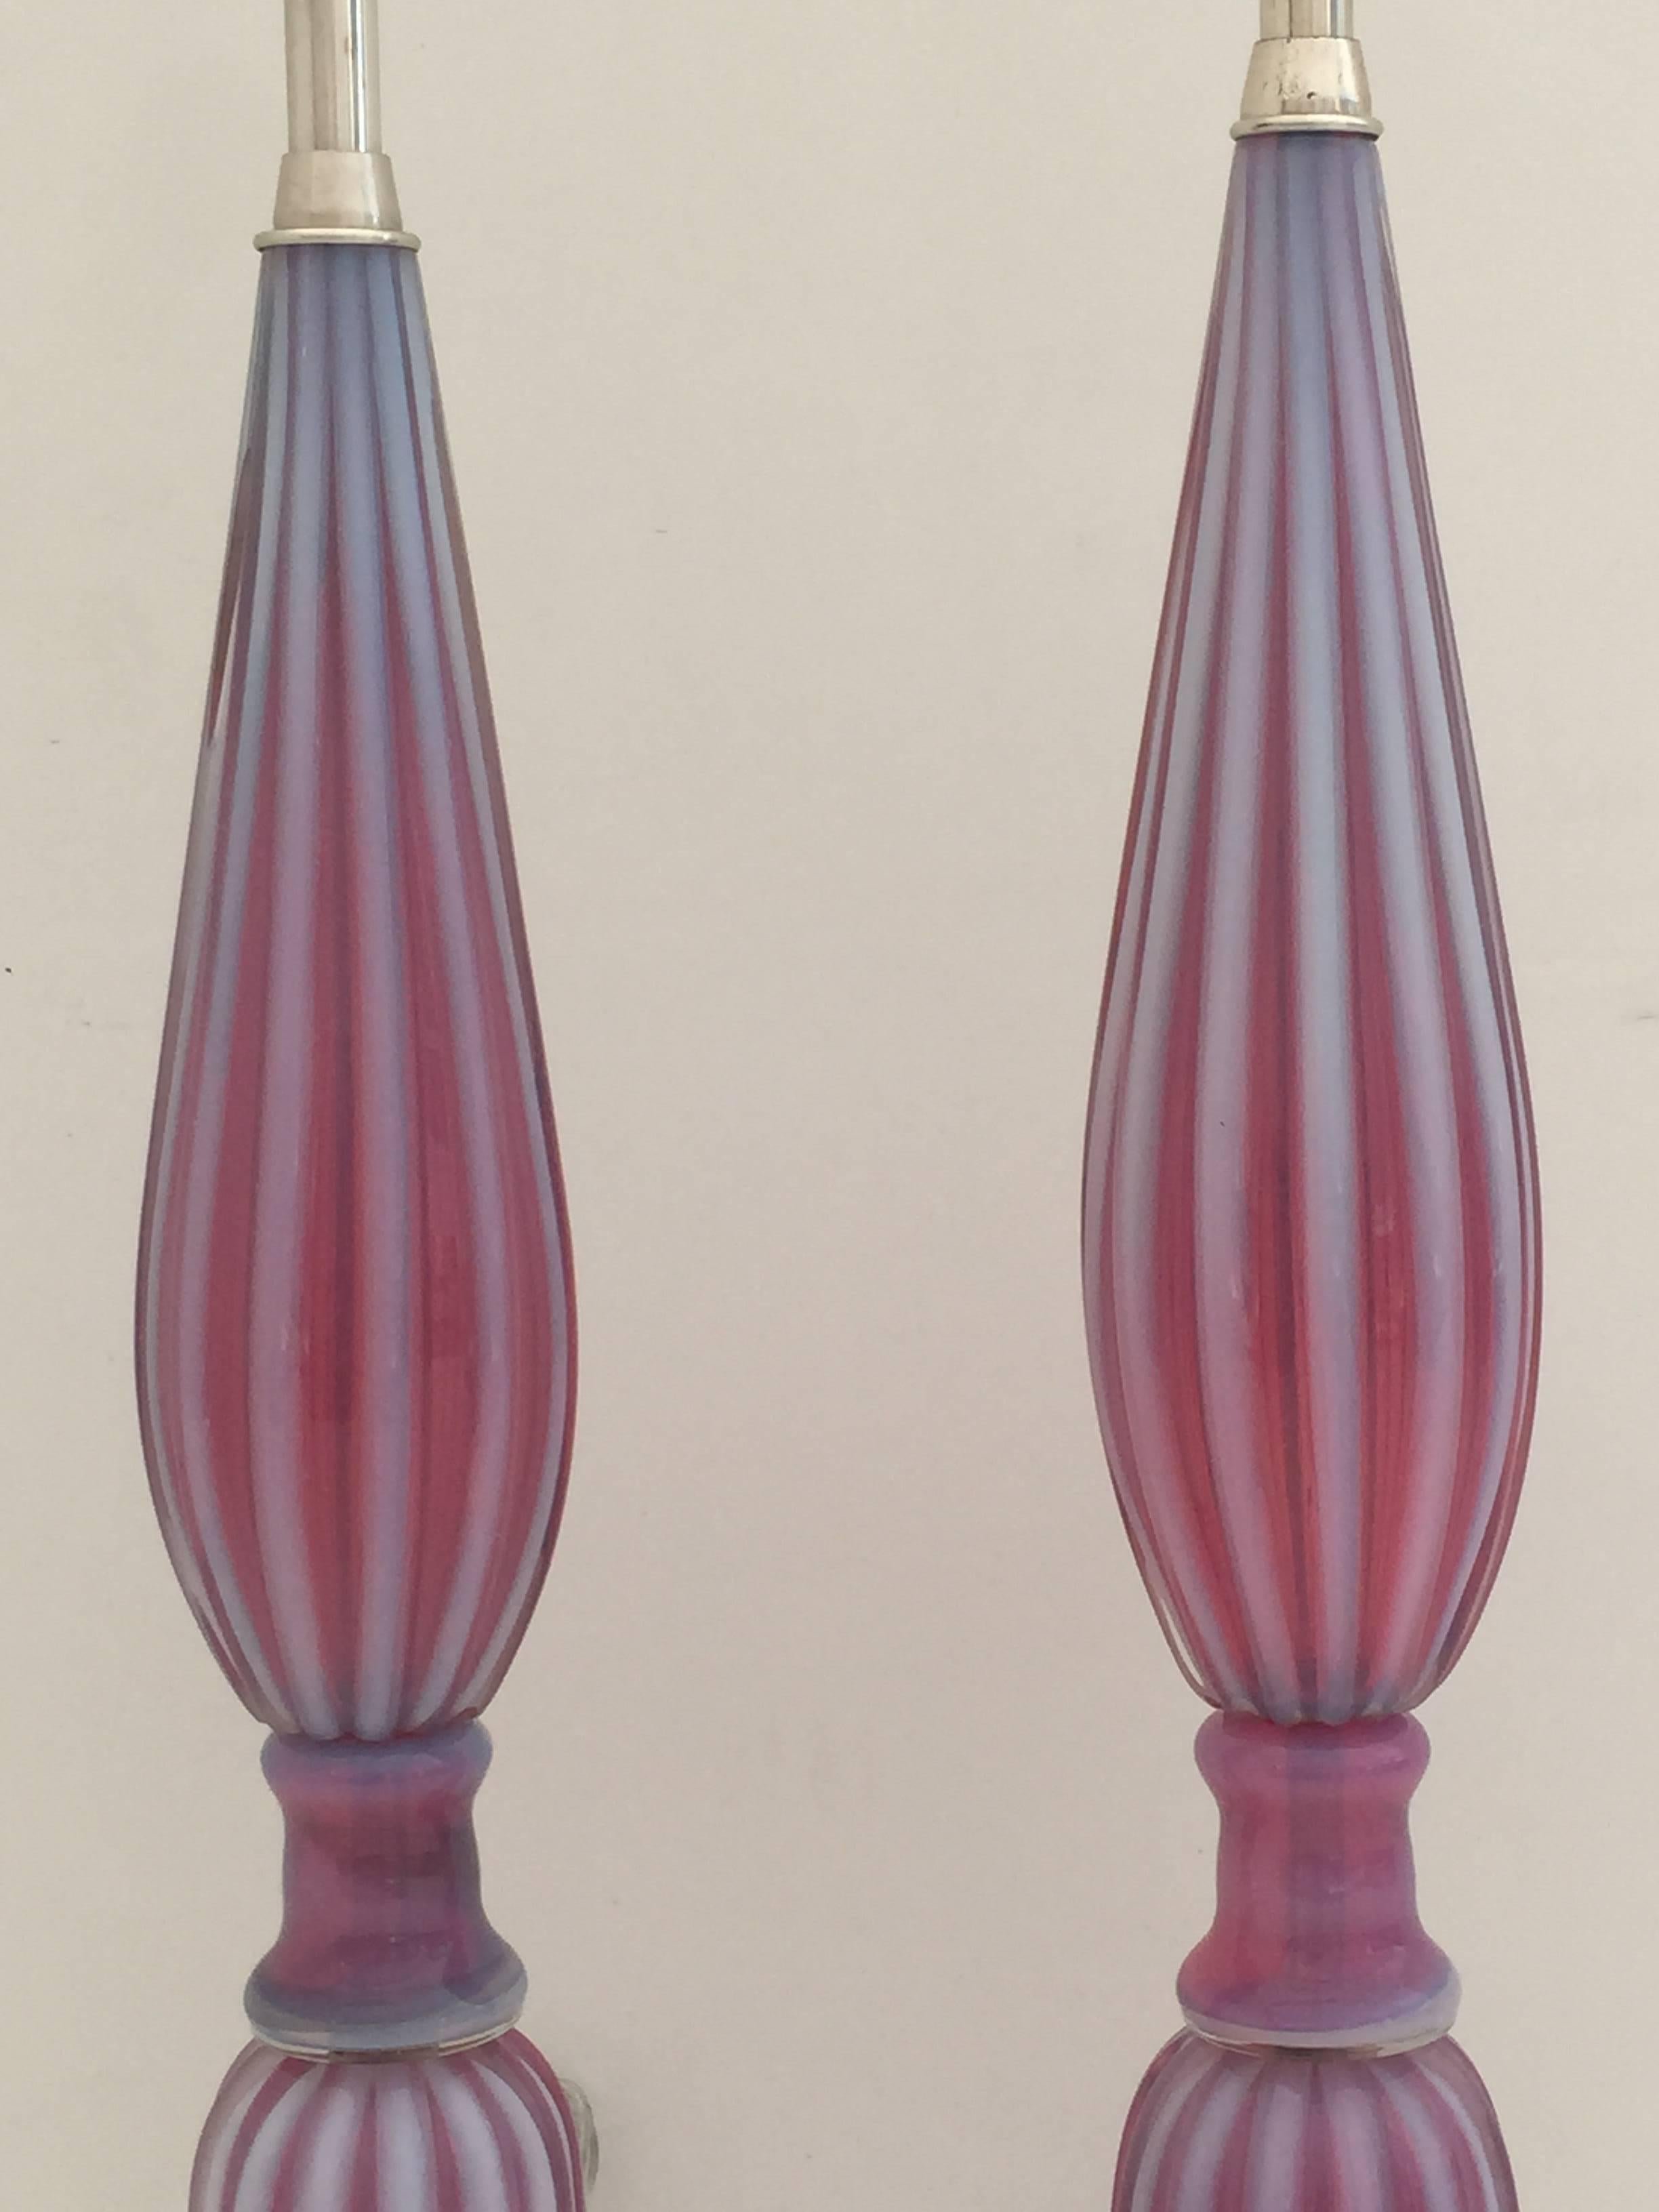 Italian Seguso Murano Pink Opalescent Glass Lamps on Lucite Base